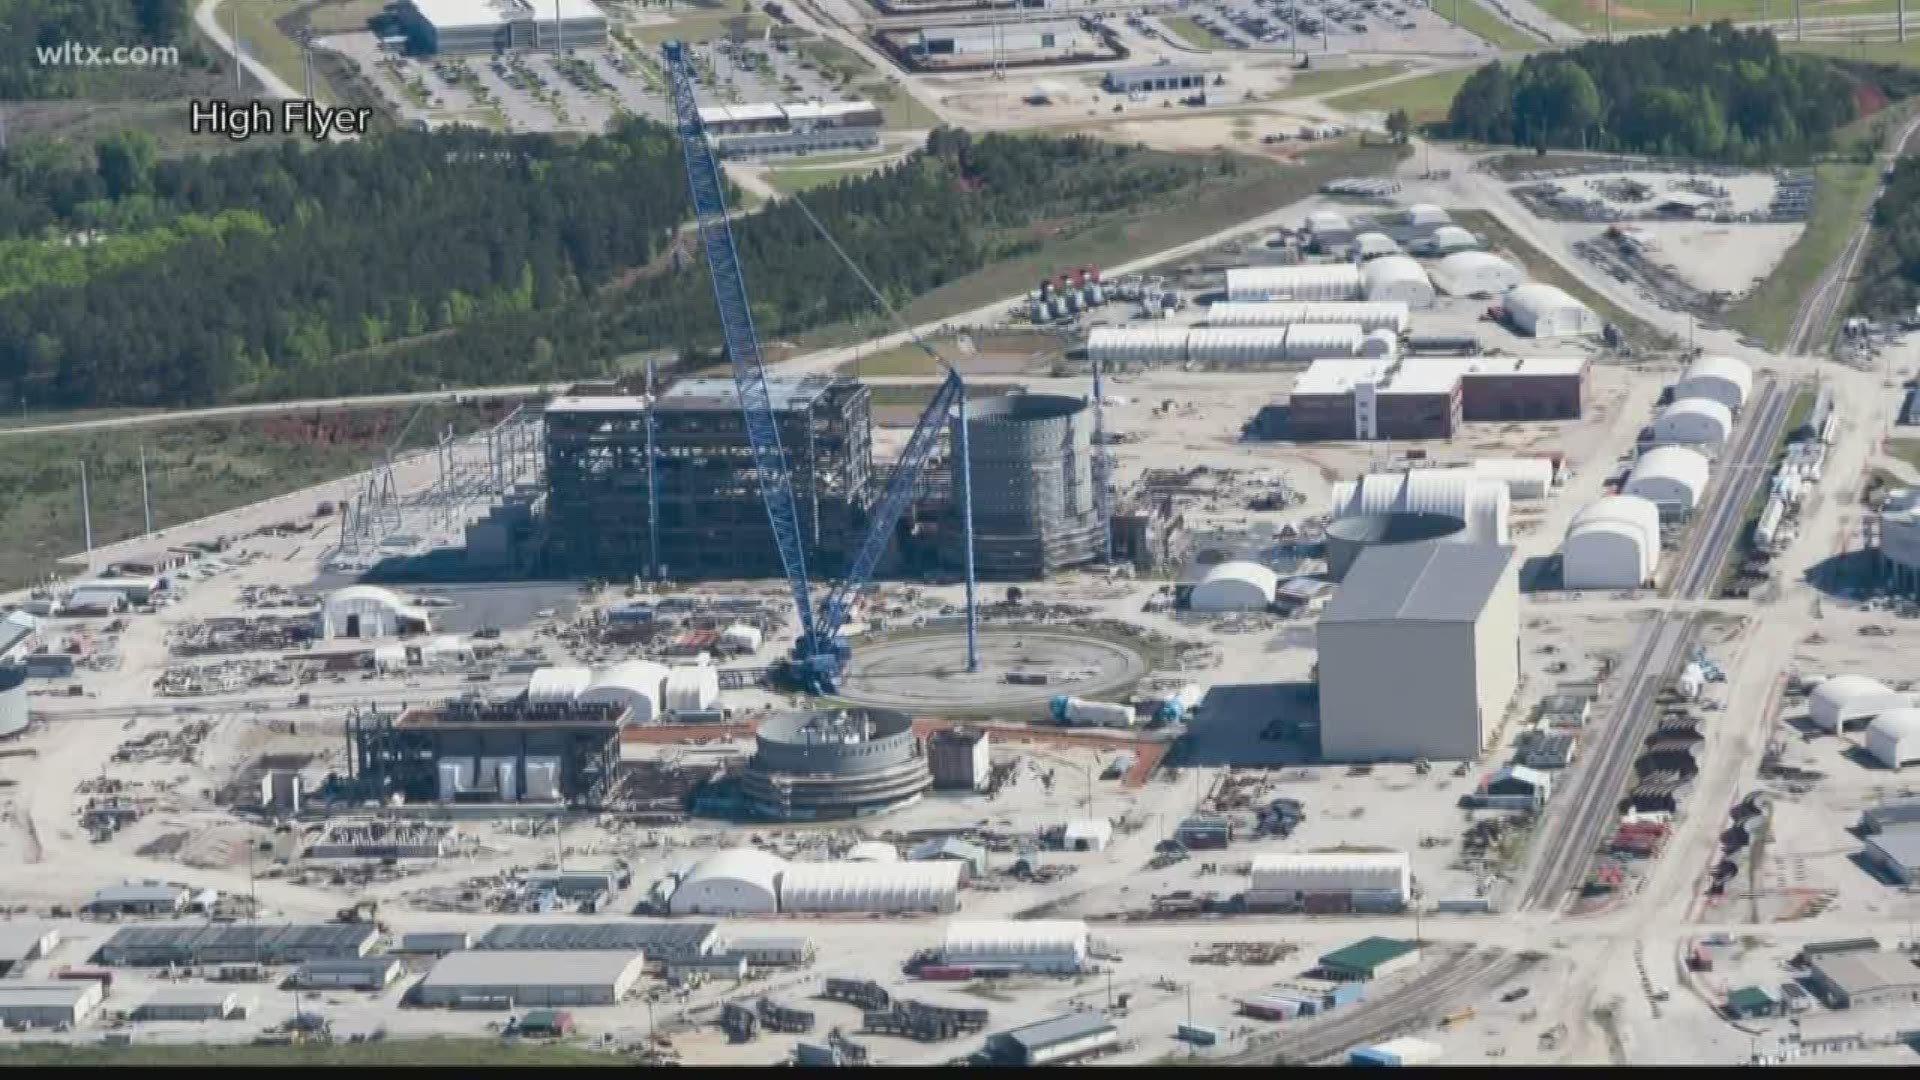 No reactor is operating at the plant a week after the leak was discovered.